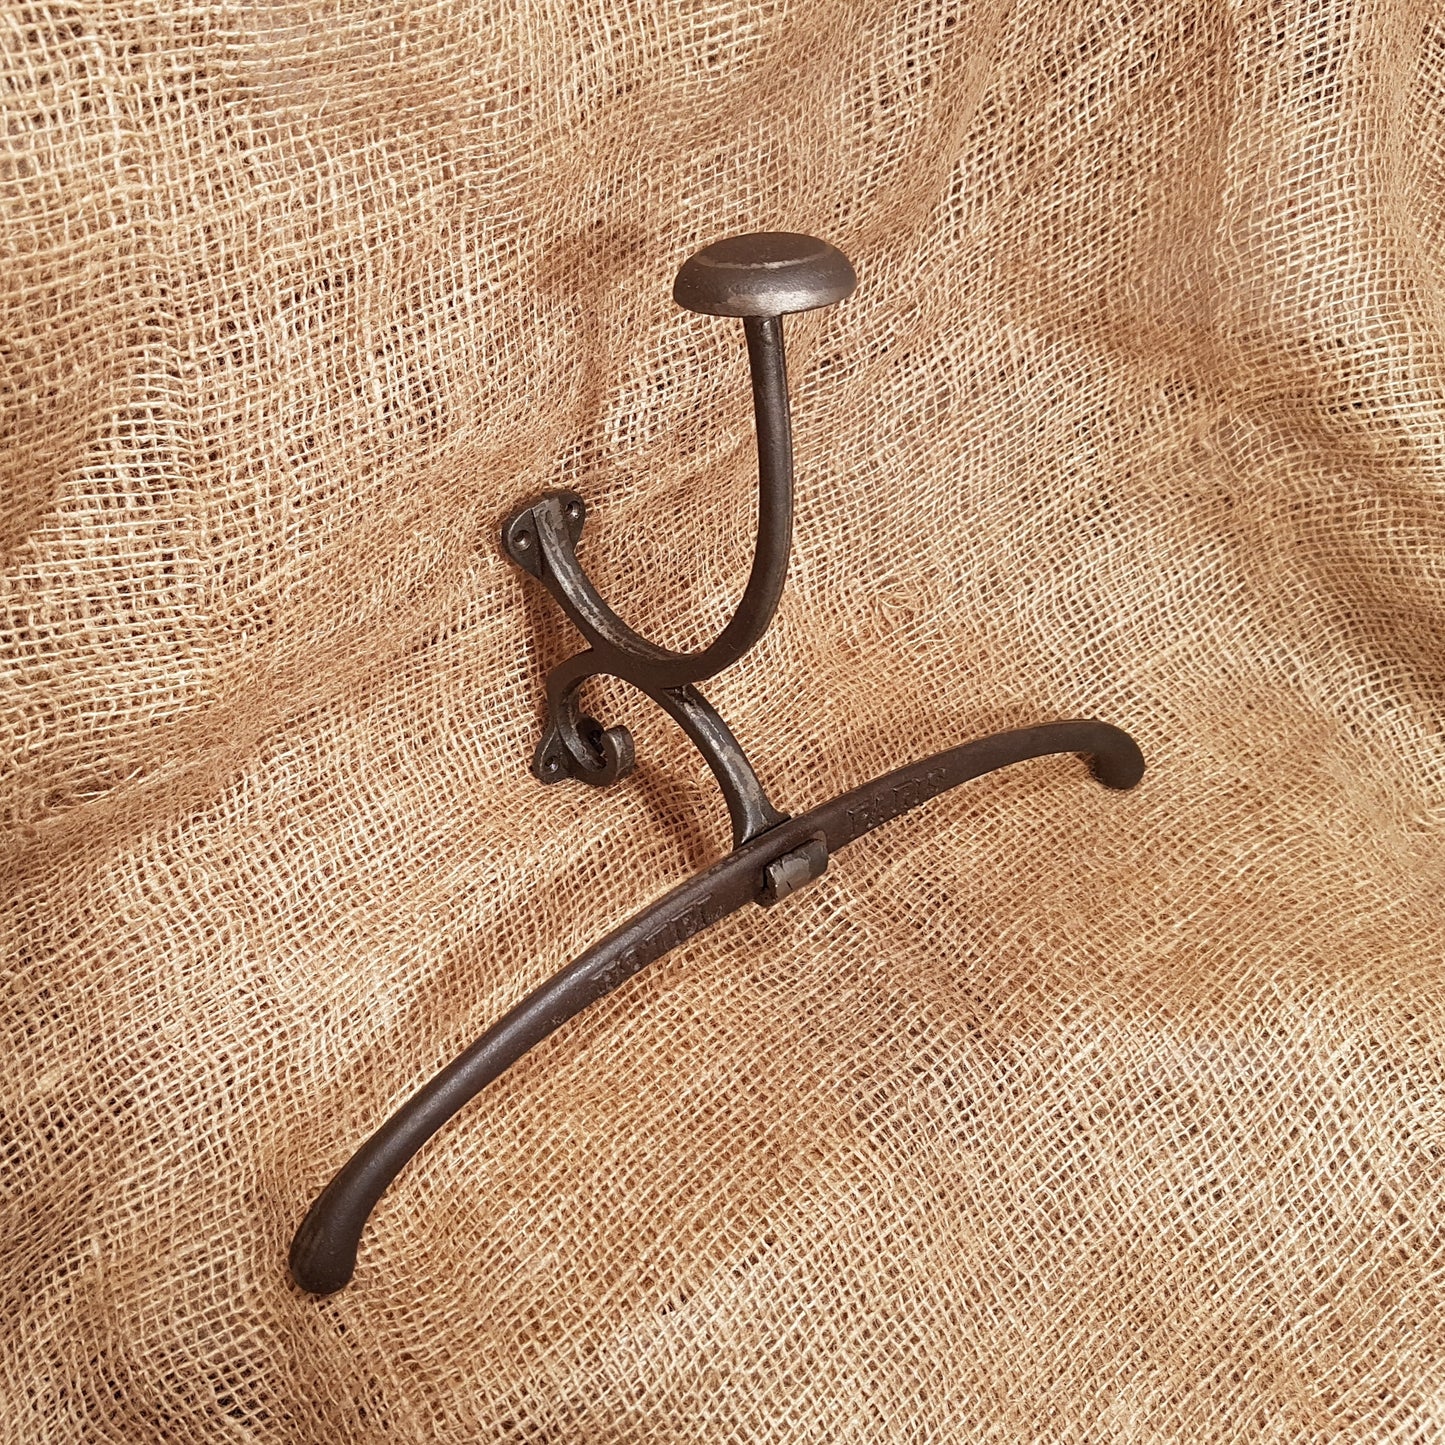 Jacket Hanger - Hotel Paris - Spearhead Collection - Hat and Coat Hooks - Hat and Coat Hooks, Home Decor, Hooks, Hotel, Interior Decor, Victorian